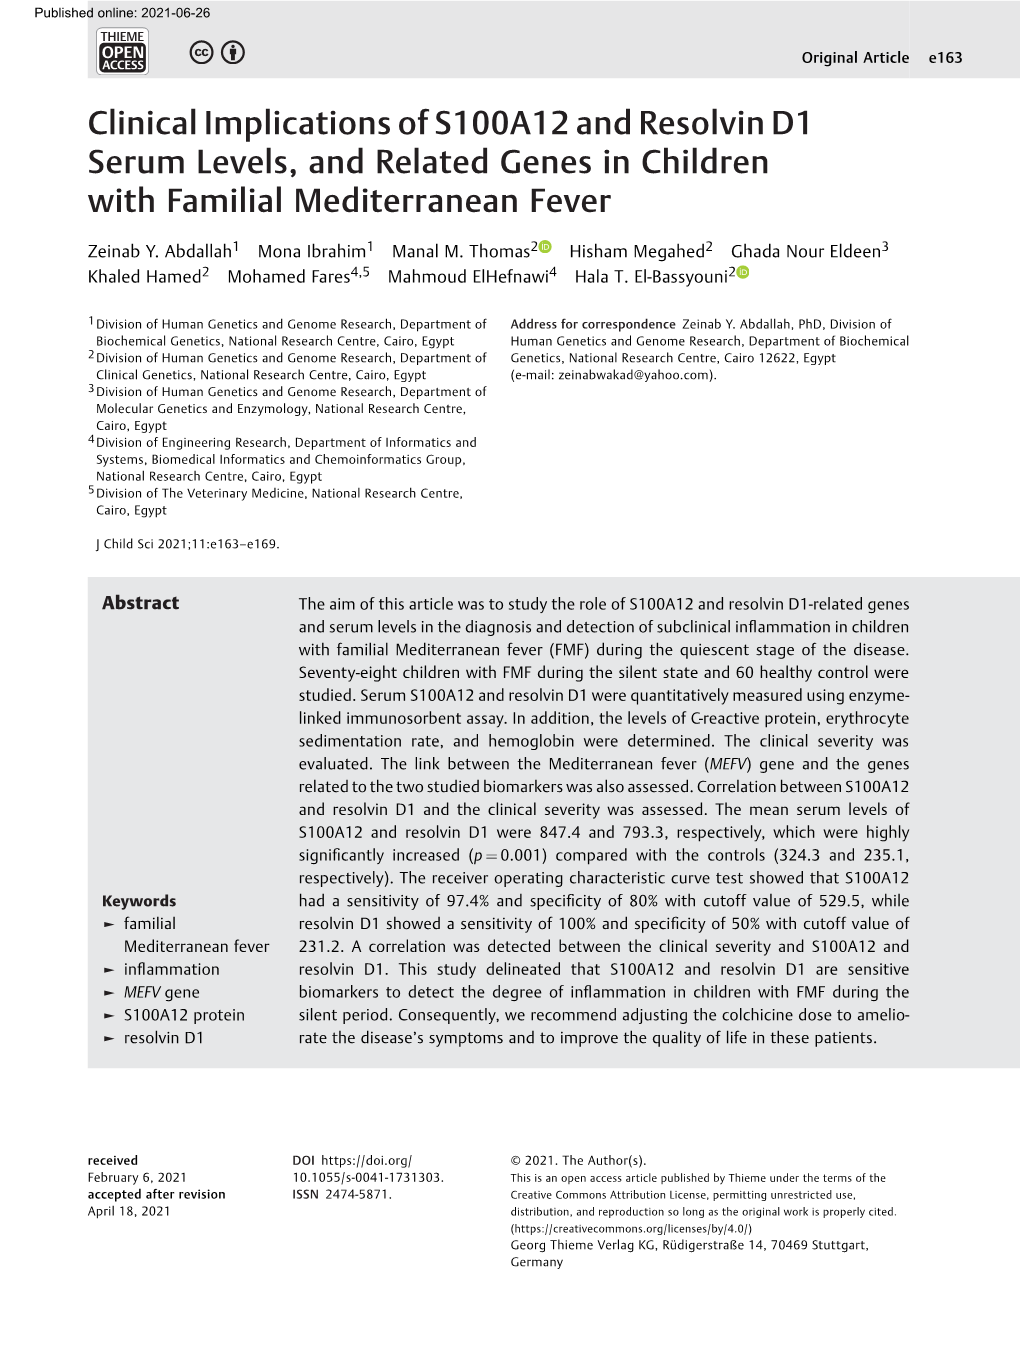 Clinical Implications of S100A12 and Resolvin D1 Serum Levels, and Related Genes in Children with Familial Mediterranean Fever